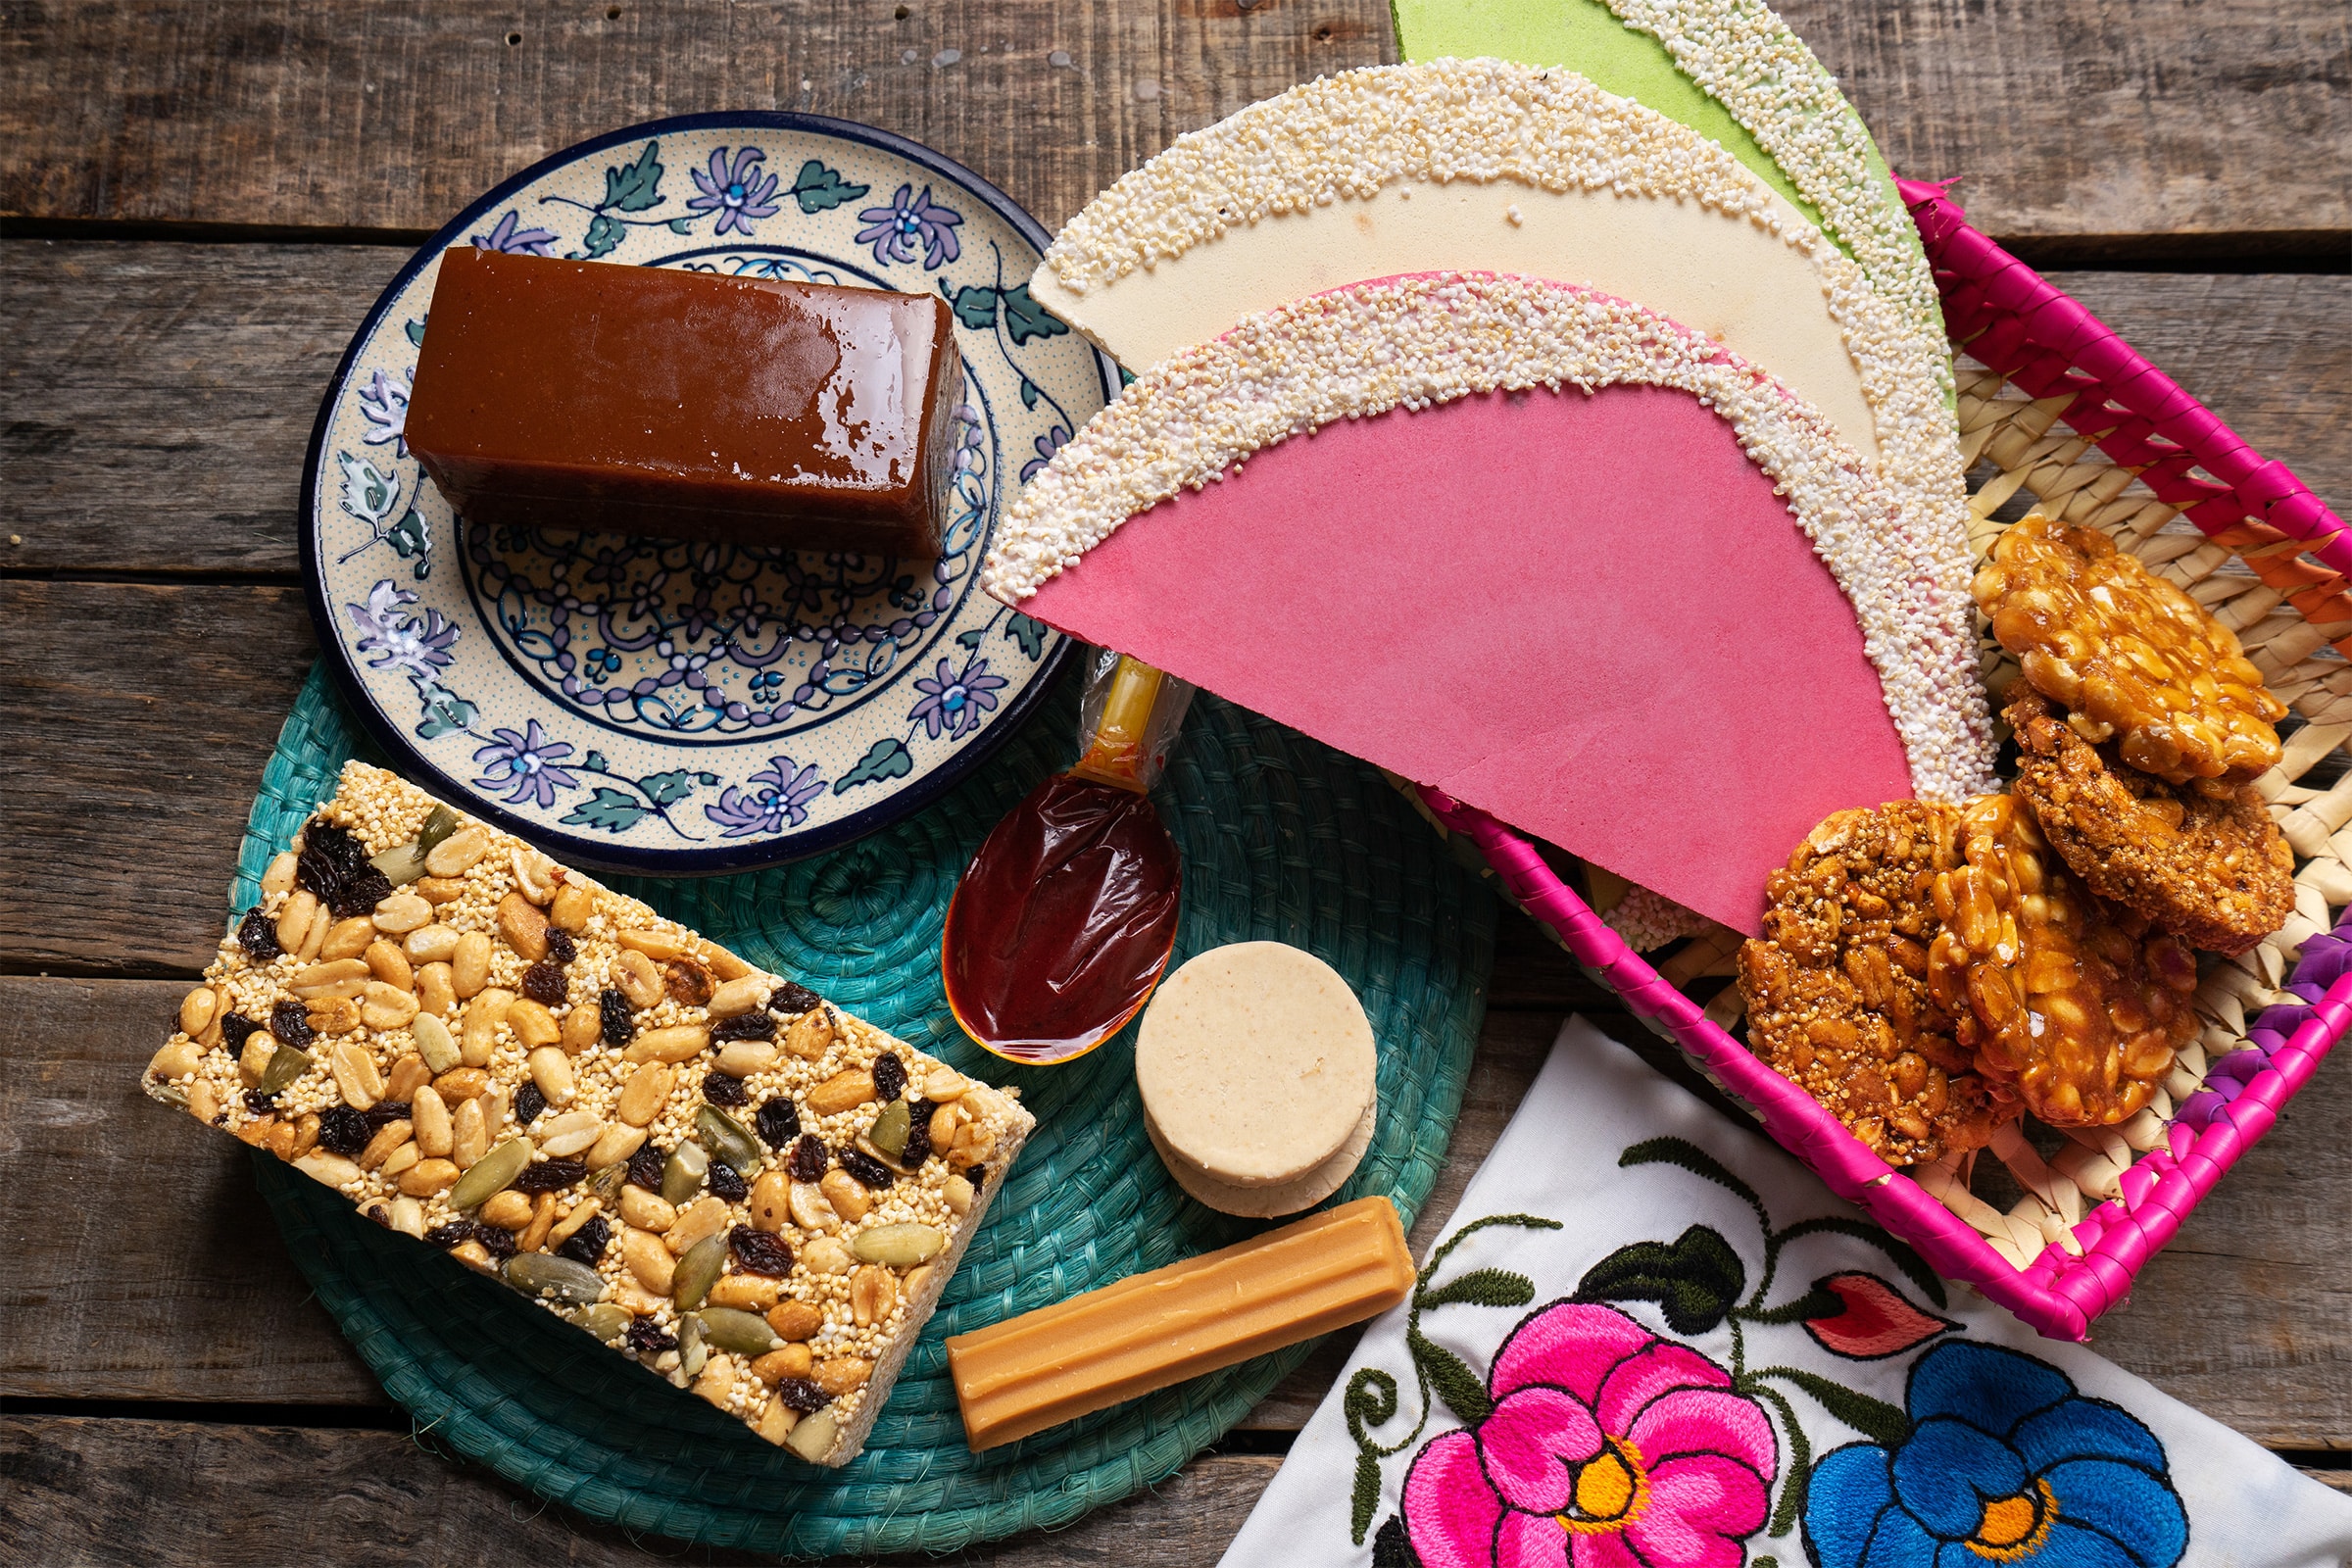 Assortment of traditional Mexican desserts and candies